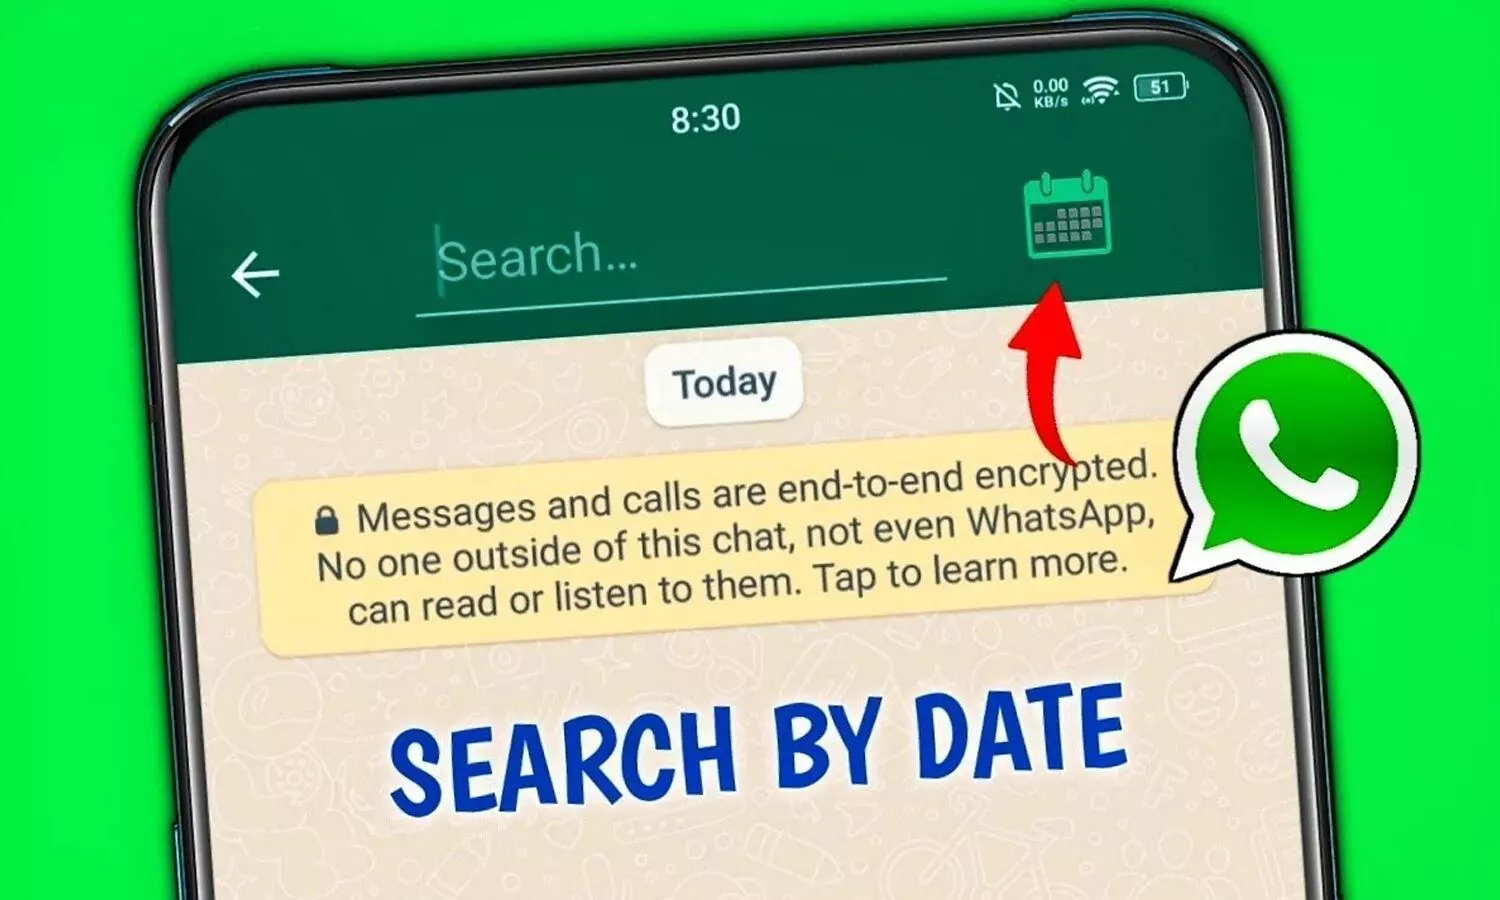 How to search messages by date on Whatsapp?